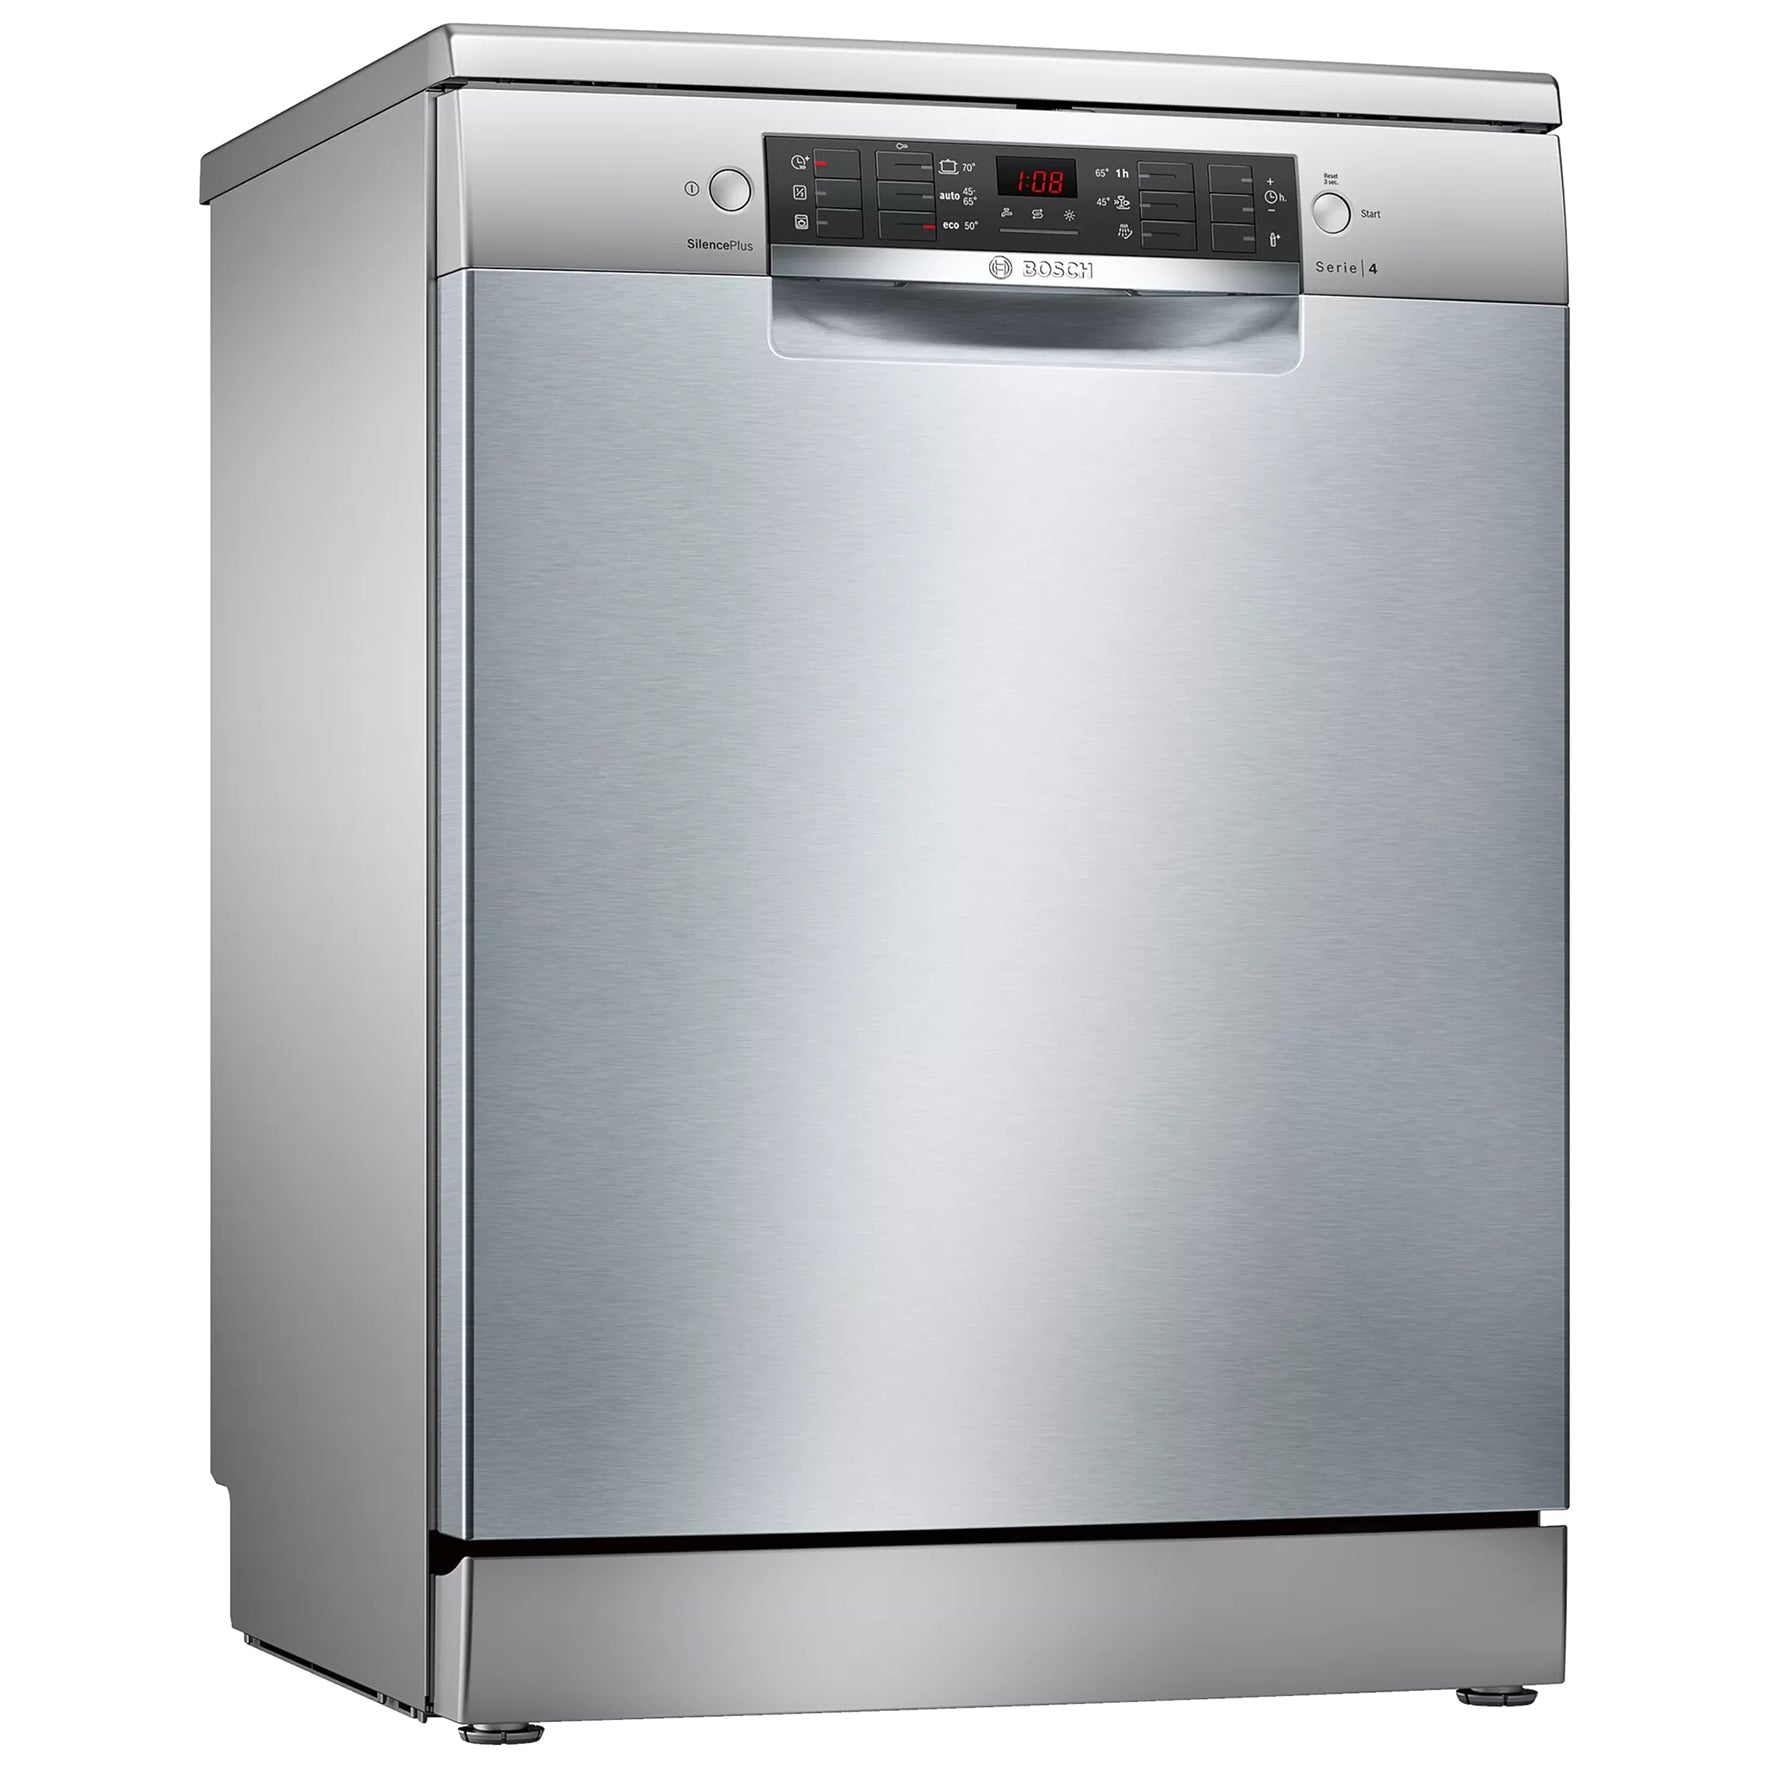 Bosch 13 Place Setting Dishwasher Stainless Steel SMS46NI00Z